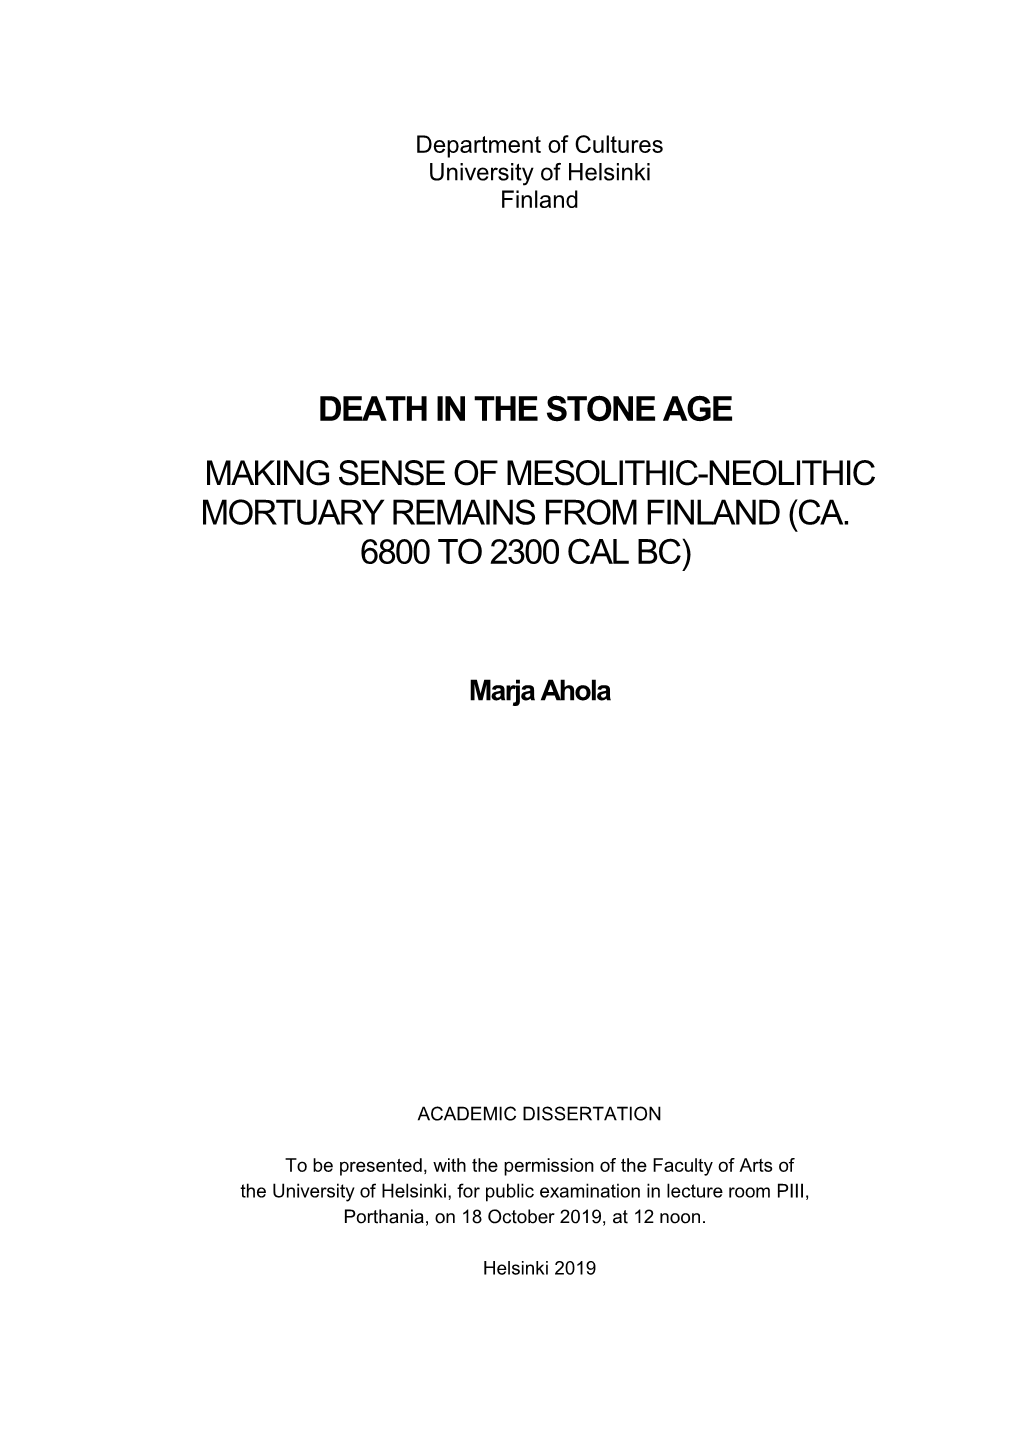 Death in the Stone Age Making Sense of Mesolithic-Neolithic Mortuary Remains from Finland (Ca